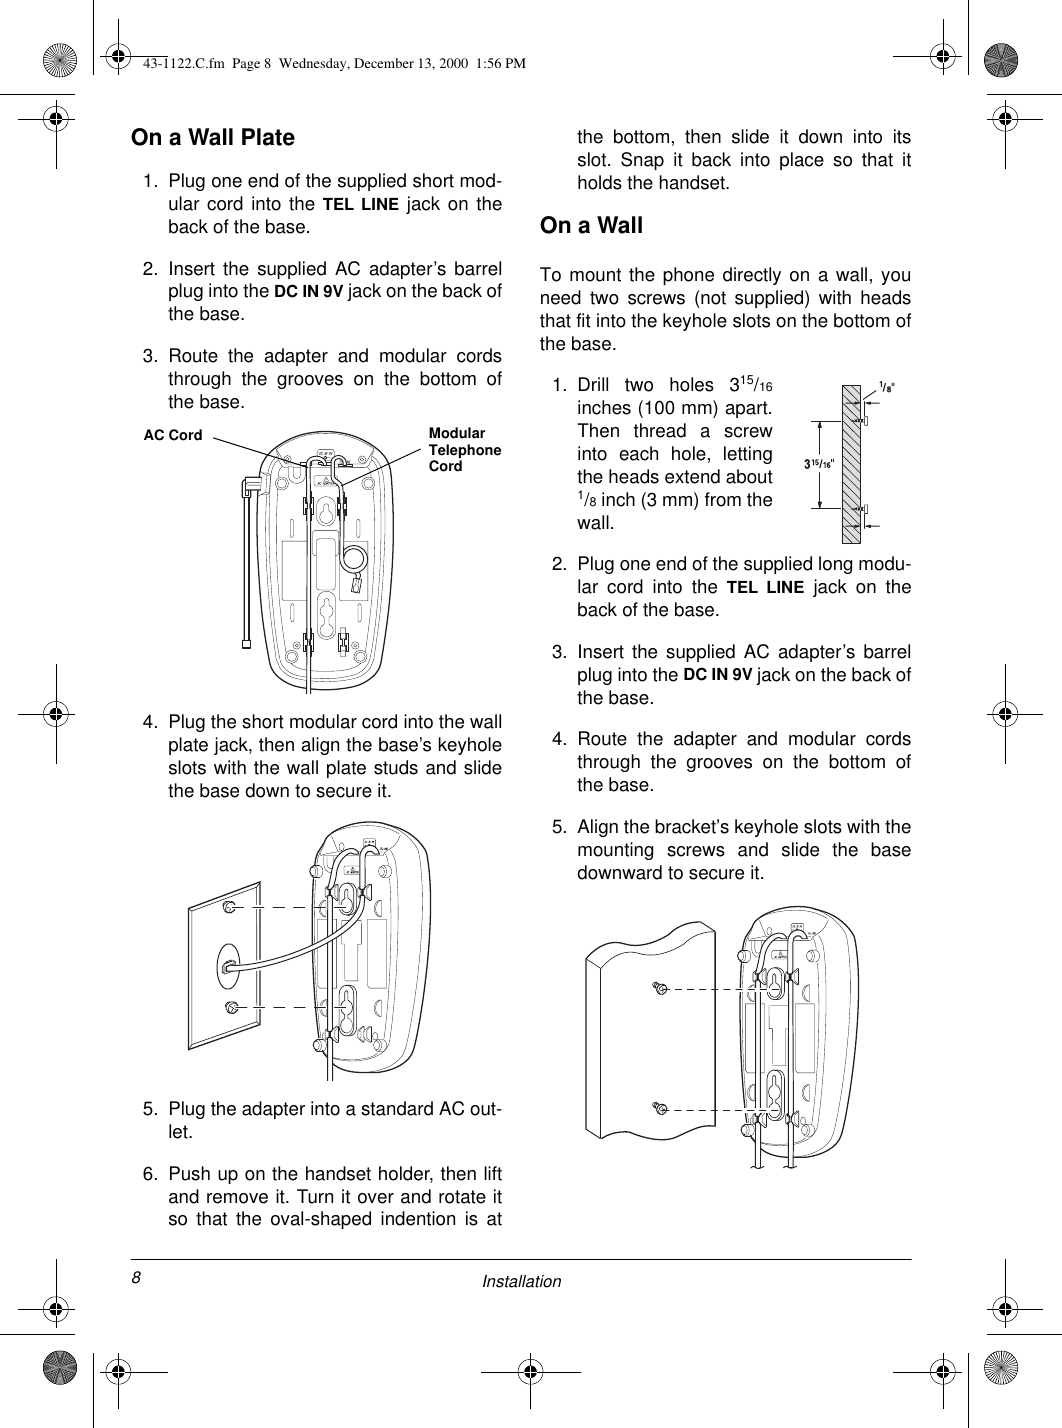 8InstallationOn a Wall Plate1. Plug one end of the supplied short mod-ular cord into the TEL LINE jack on theback of the base.2. Insert the supplied AC adapter’s barrelplug into the DC IN 9V jack on the back ofthe base.3. Route the adapter and modular cordsthrough the grooves on the bottom ofthe base.4. Plug the short modular cord into the wallplate jack, then align the base’s keyholeslots with the wall plate studs and slidethe base down to secure it.5. Plug the adapter into a standard AC out-let.6. Push up on the handset holder, then liftand remove it. Turn it over and rotate itso that the oval-shaped indention is atthe bottom, then slide it down into itsslot. Snap it back into place so that itholds the handset.On a WallTo mount the phone directly on a wall, youneed two screws (not supplied) with headsthat fit into the keyhole slots on the bottom ofthe base.1. Drill two holes 315/16inches (100 mm) apart.Then thread a screwinto each hole, lettingthe heads extend about1/8 inch (3 mm) from thewall.2. Plug one end of the supplied long modu-lar cord into the TEL LINE jack on theback of the base.3. Insert the supplied AC adapter’s barrelplug into the DC IN 9V jack on the back ofthe base.4. Route the adapter and modular cordsthrough the grooves on the bottom ofthe base.5. Align the bracket’s keyhole slots with themounting screws and slide the basedownward to secure it.AC Cord Modular Telephone Cord43-1122.C.fm  Page 8  Wednesday, December 13, 2000  1:56 PM